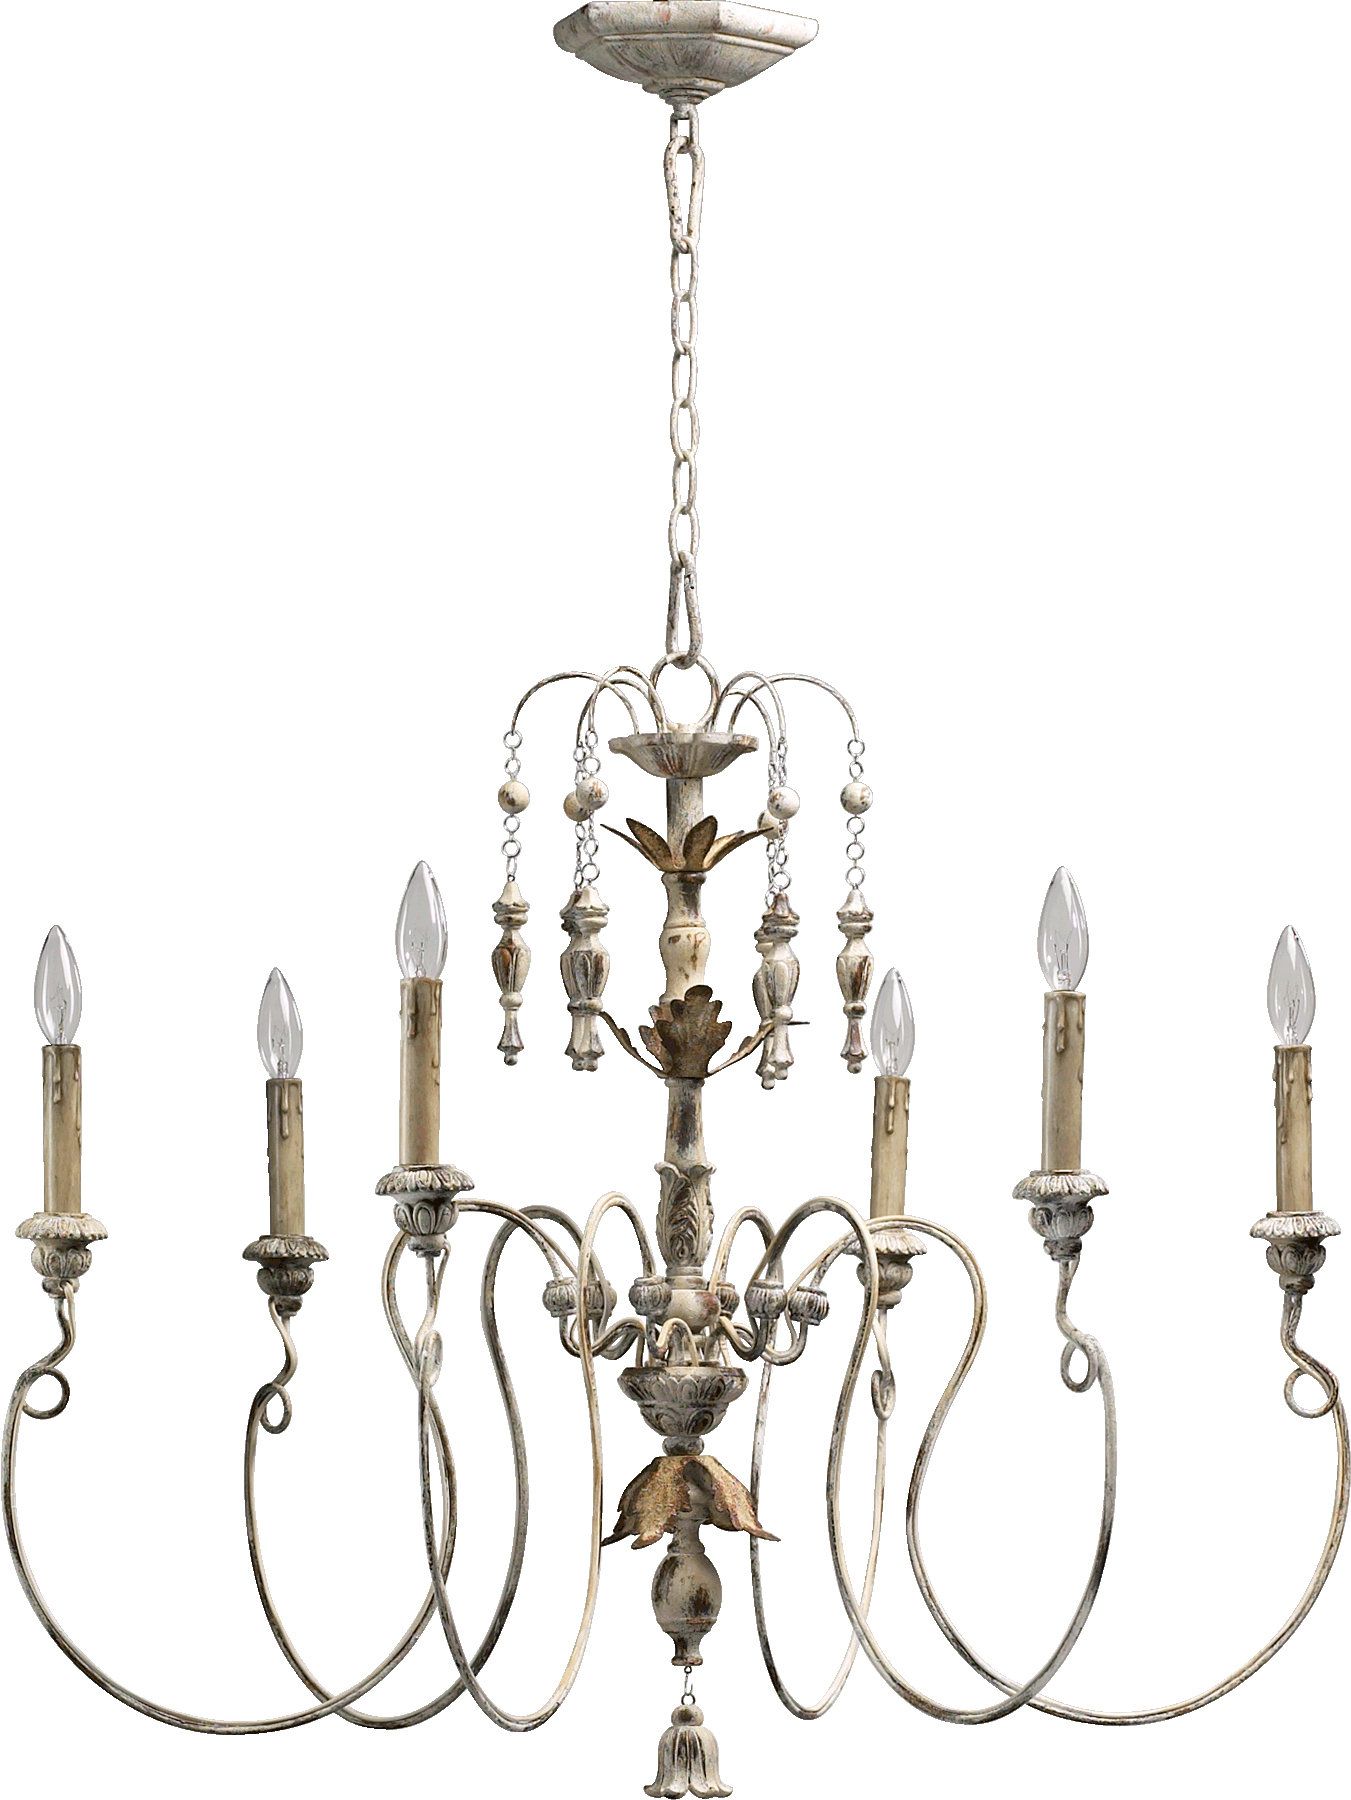 Paladino 6 Light Chandelier Within Gaines 9 Light Candle Style Chandeliers (View 25 of 30)